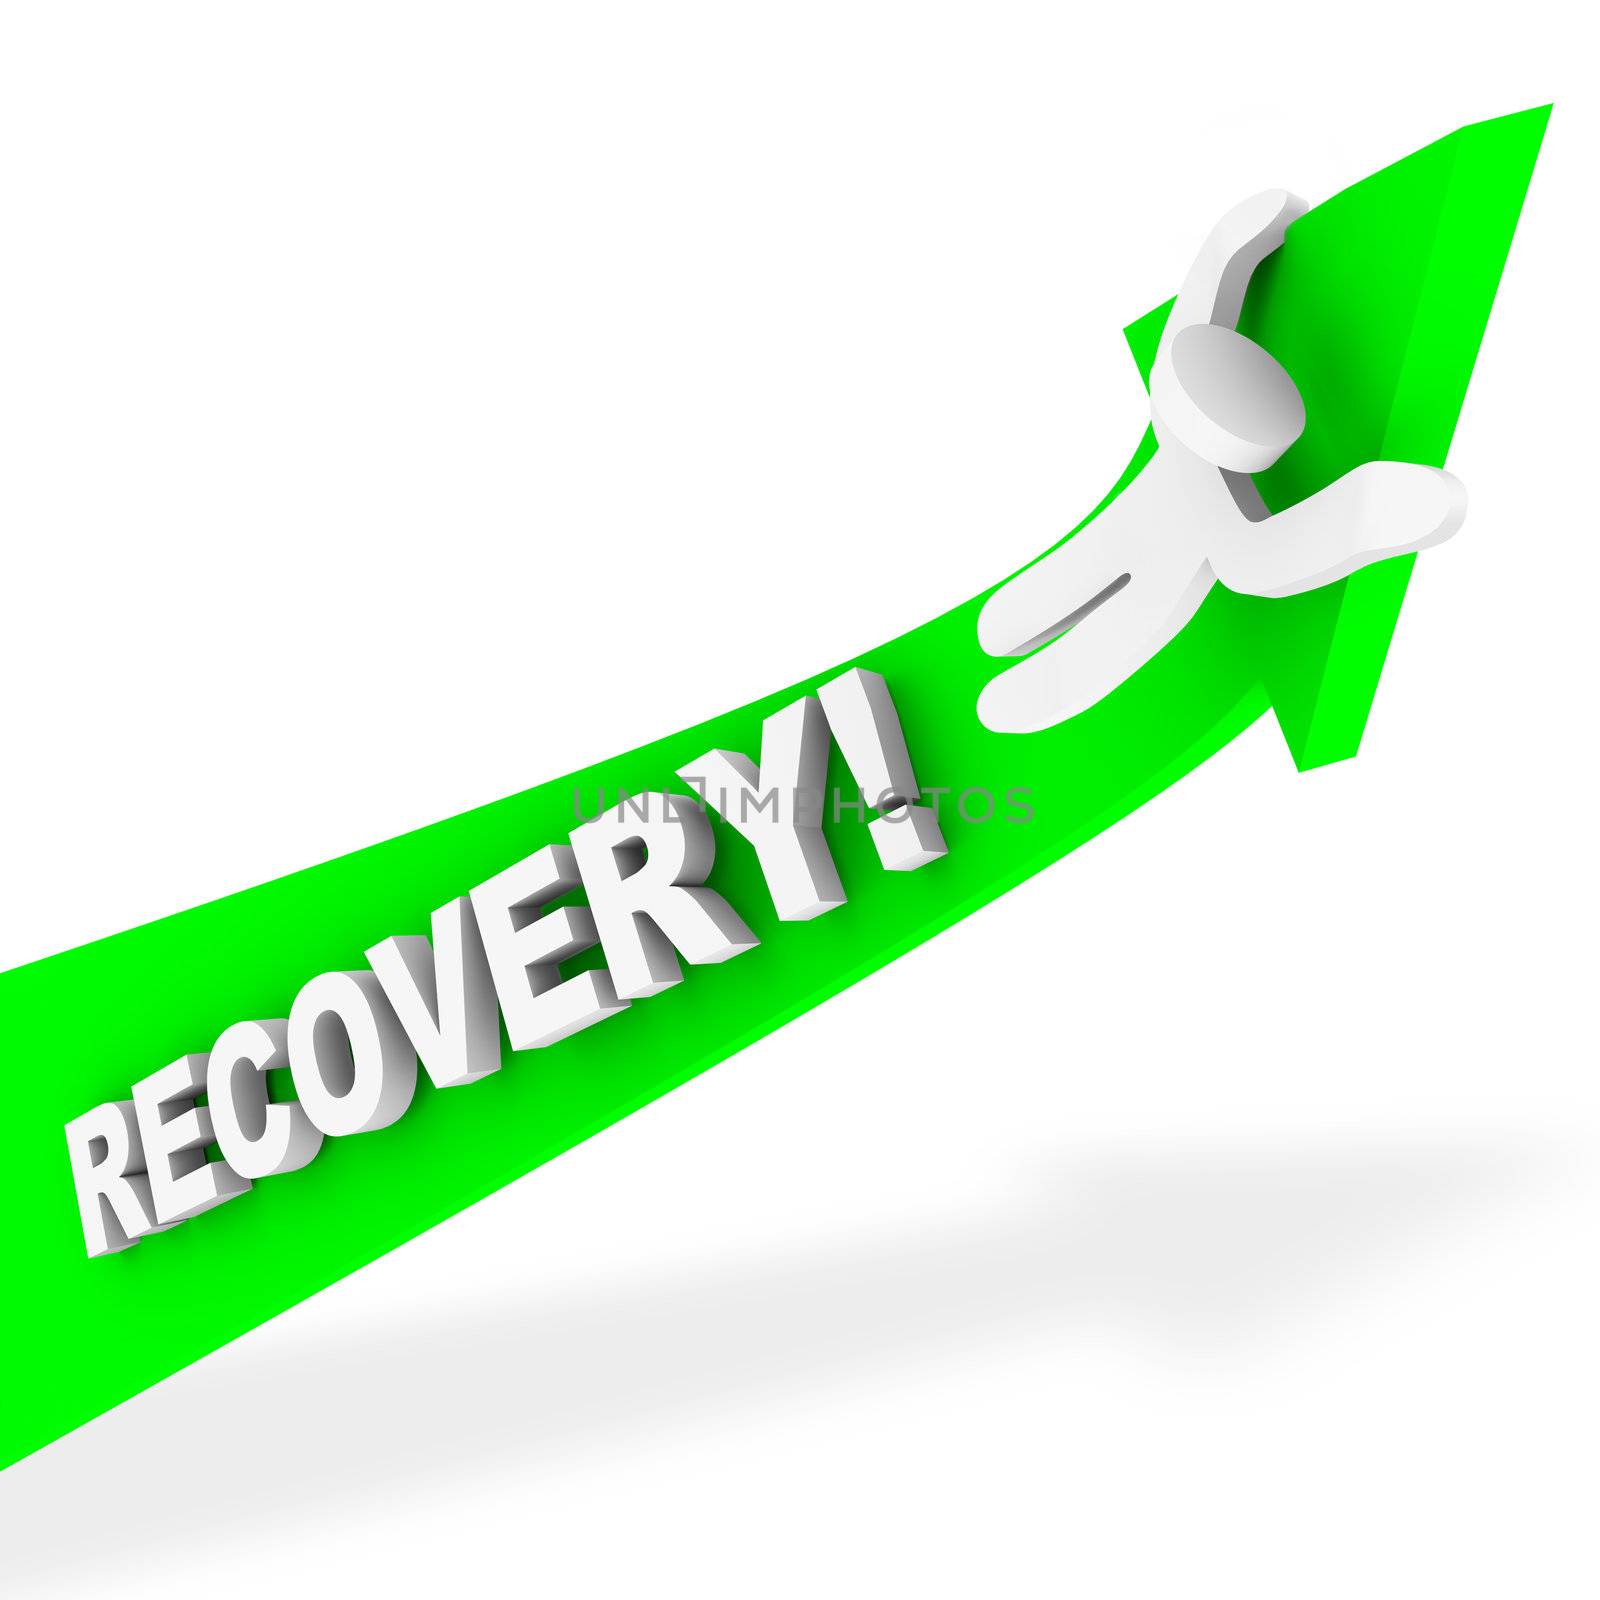 Riding the Arrow of Recovery by iQoncept